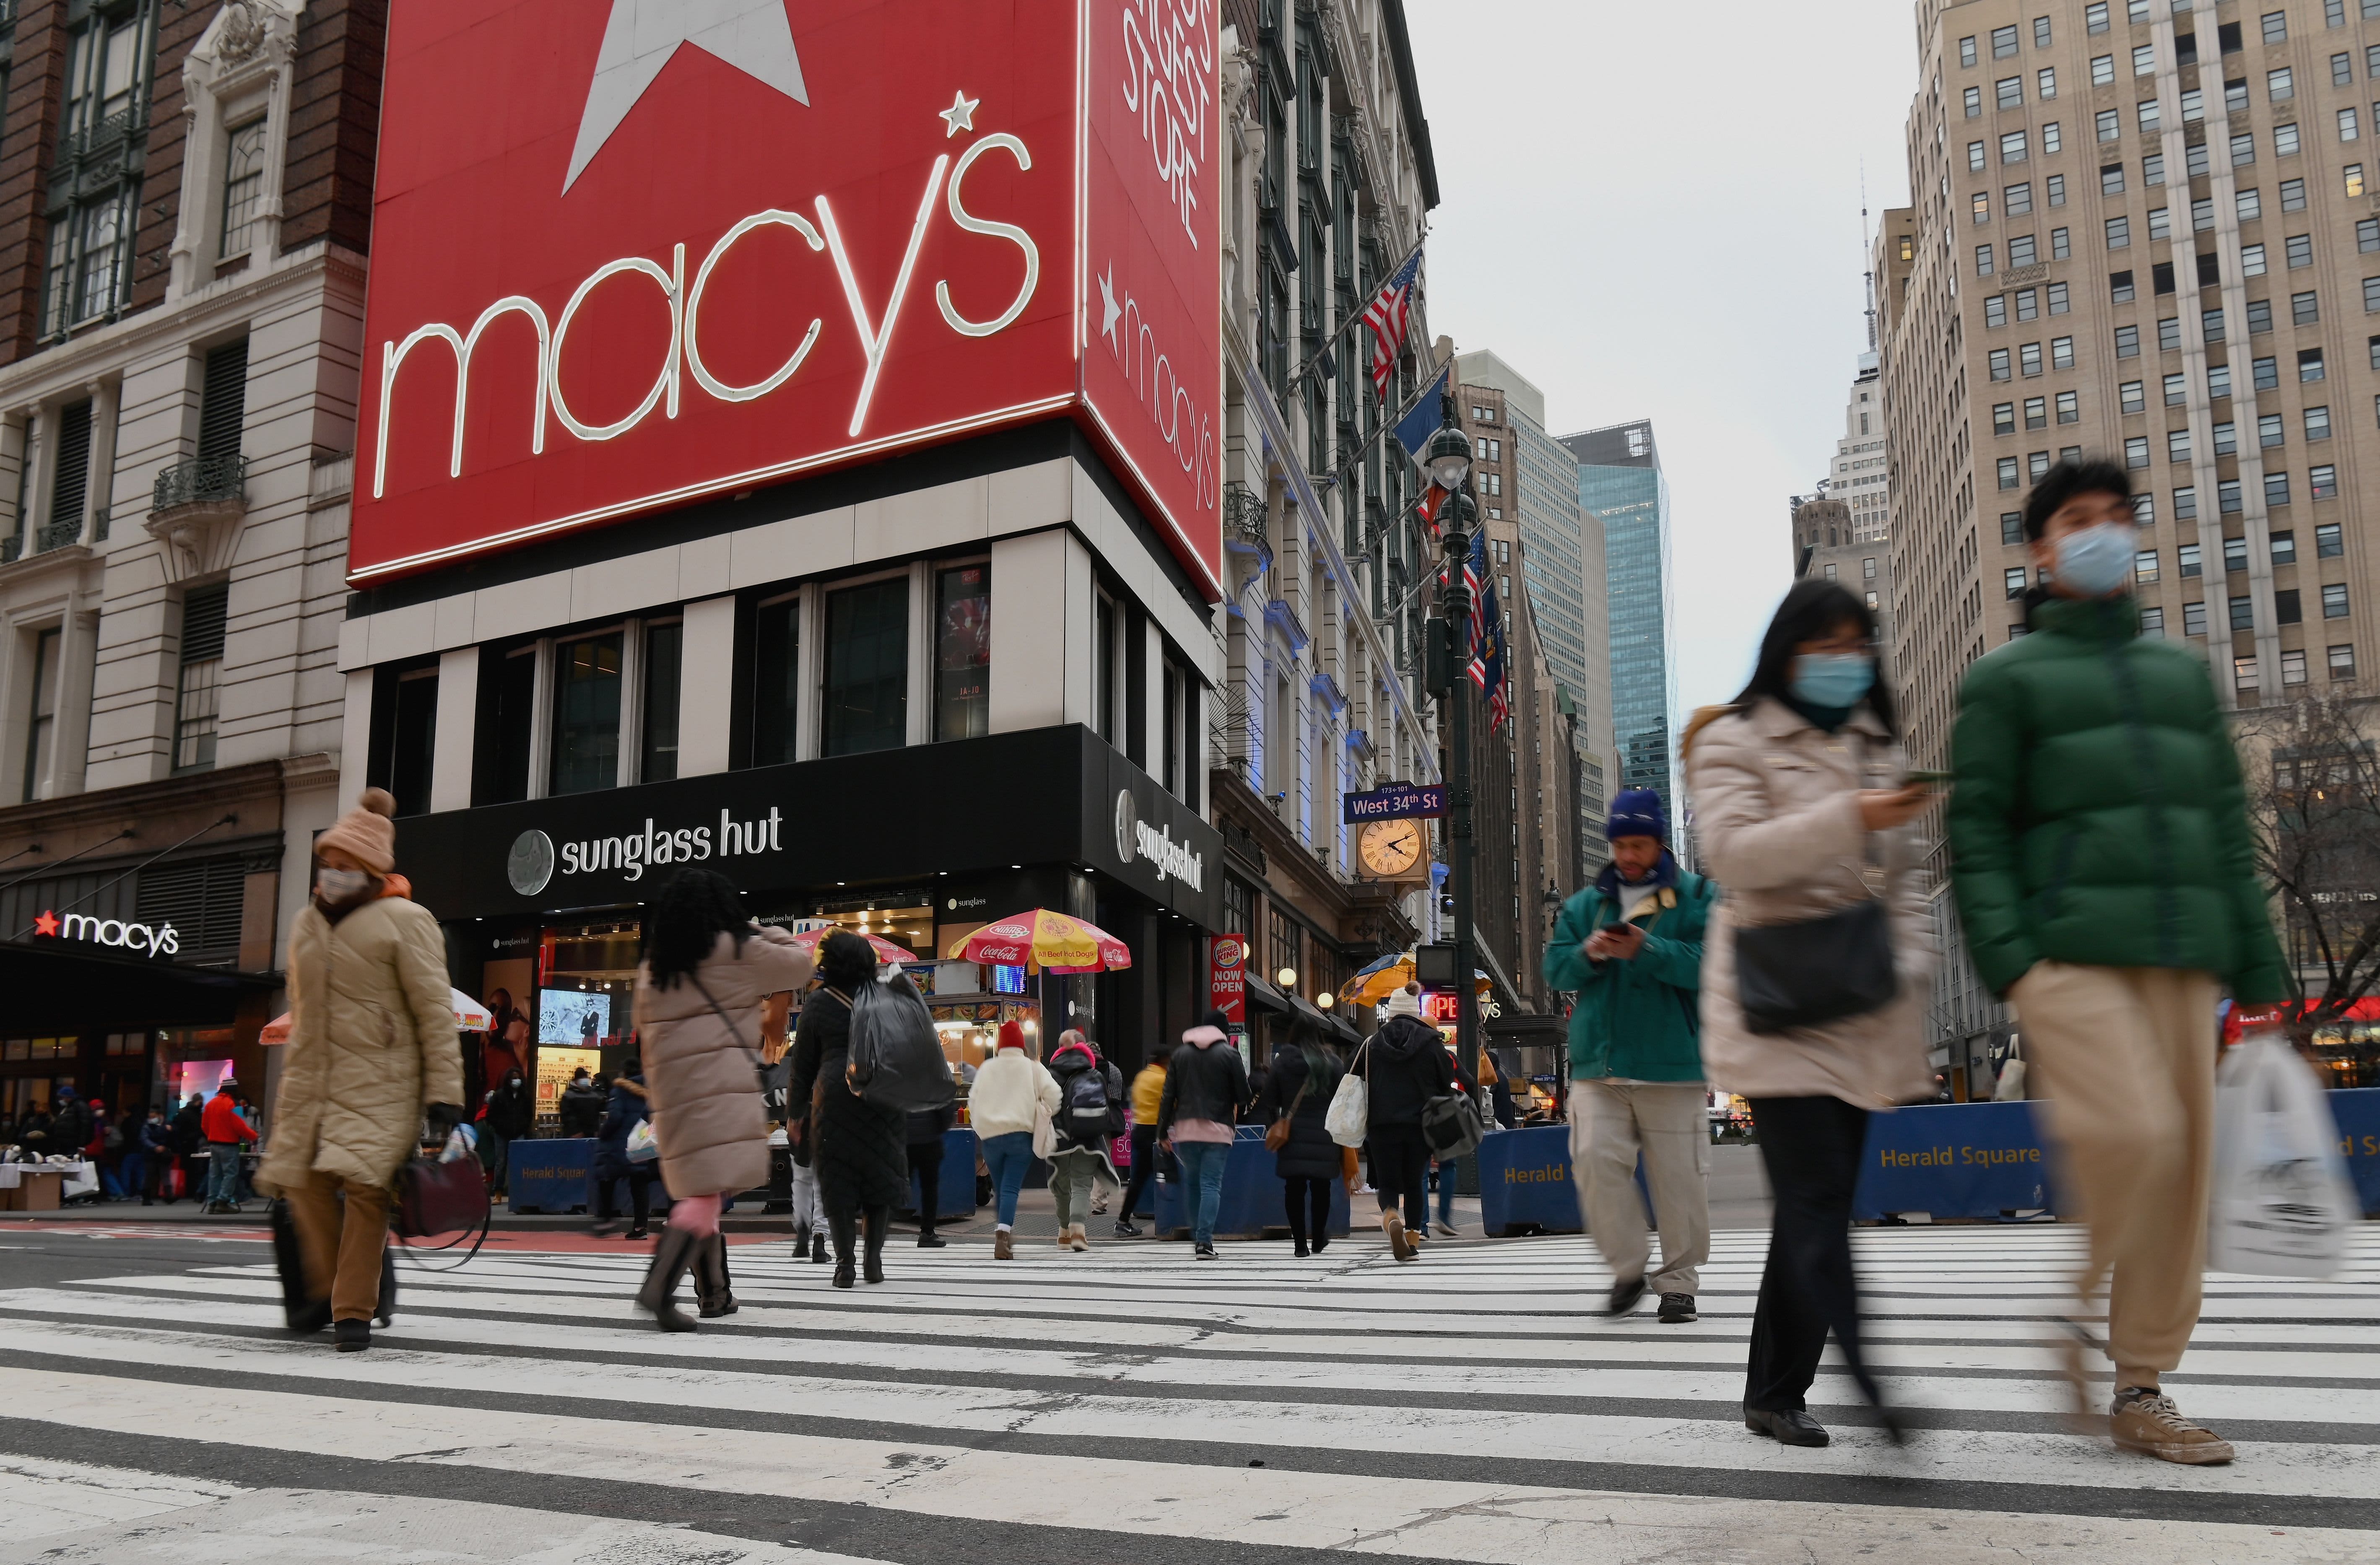 As more retailers turn to tech, Macy's store employees score victory in challenging self-checkout in mobile app